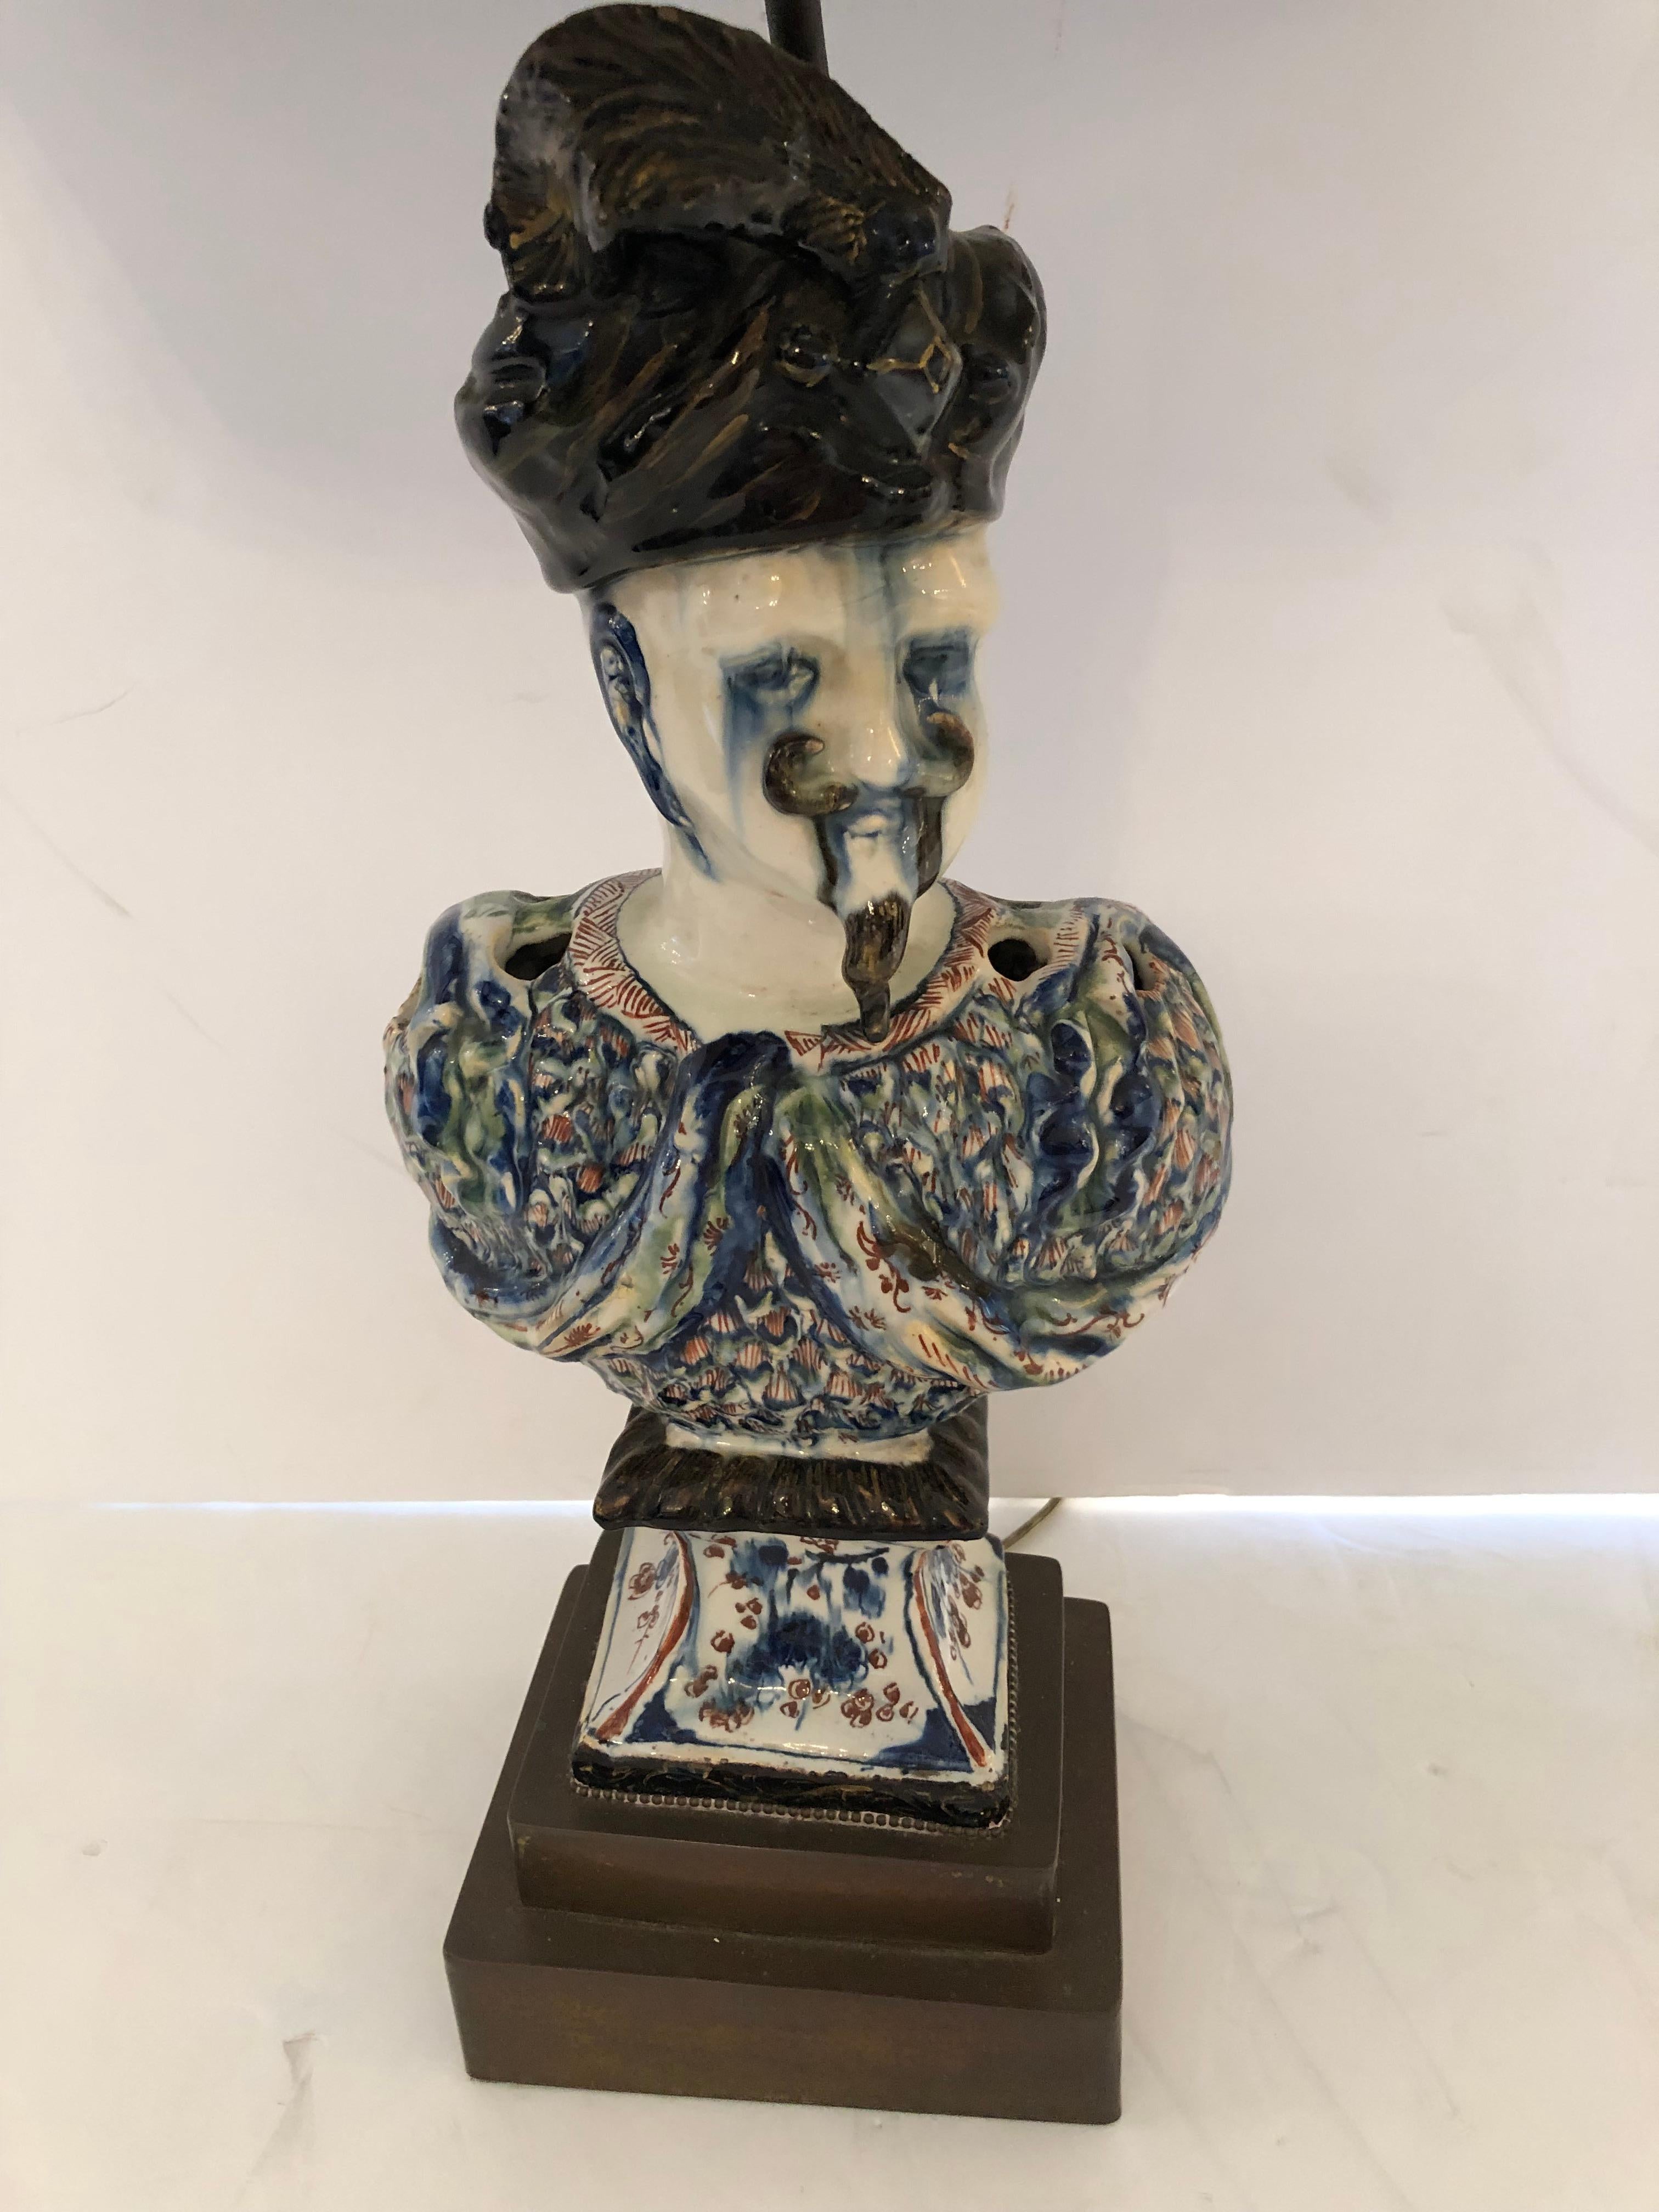 Wonderful and unusual antique French faience table lamp having sculptural blue and white bust of a soldier with jaunty turban on his head. Base is bronzed brass. The custom hand painted shade is absolutely sublime.
Lamp is 7 W x 5 D.